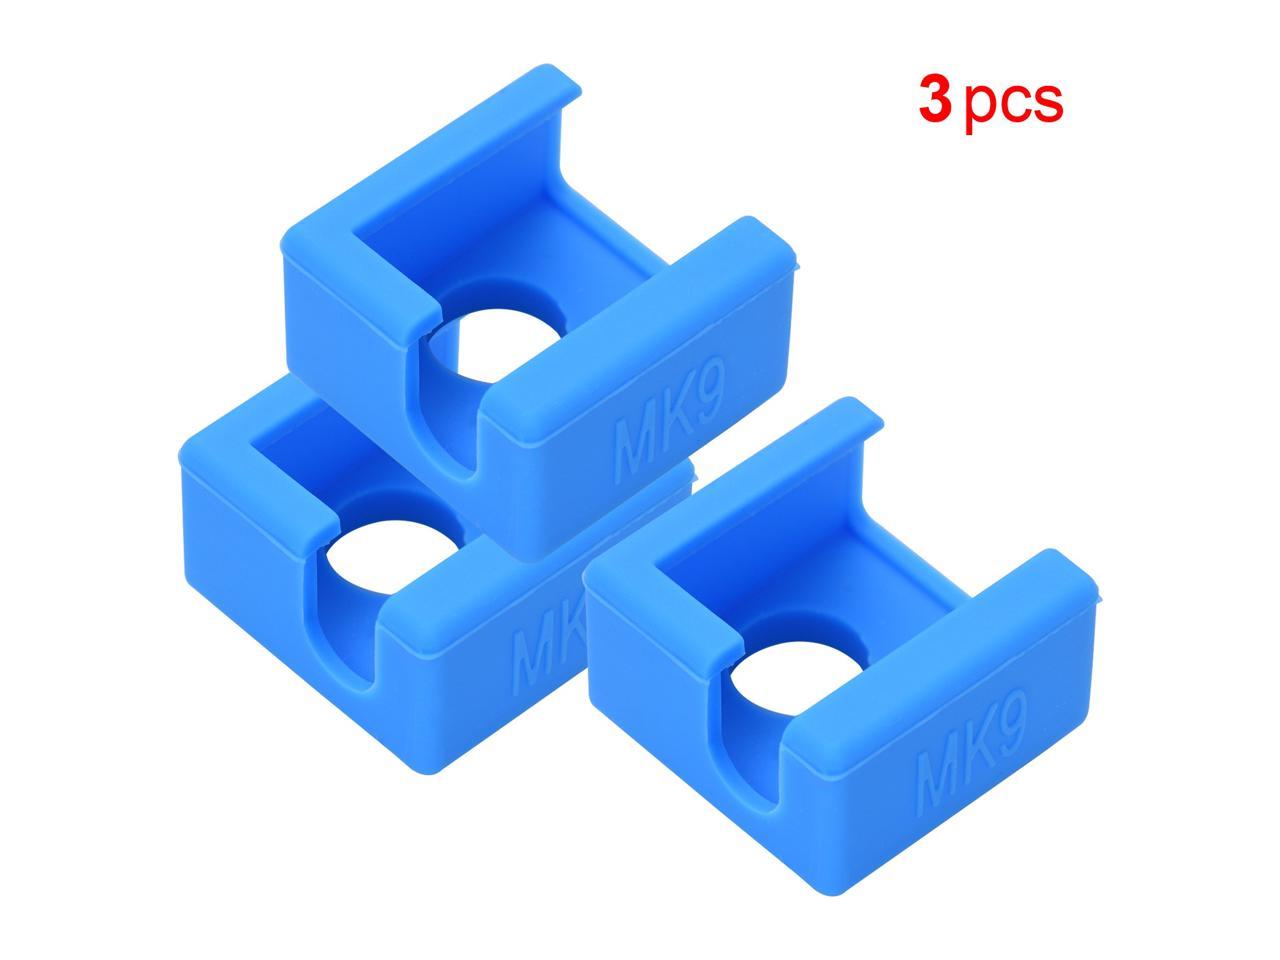 Aibecy 3pcs MK9 Hotend Silicone Sock Heater Block Protective Silicone ...